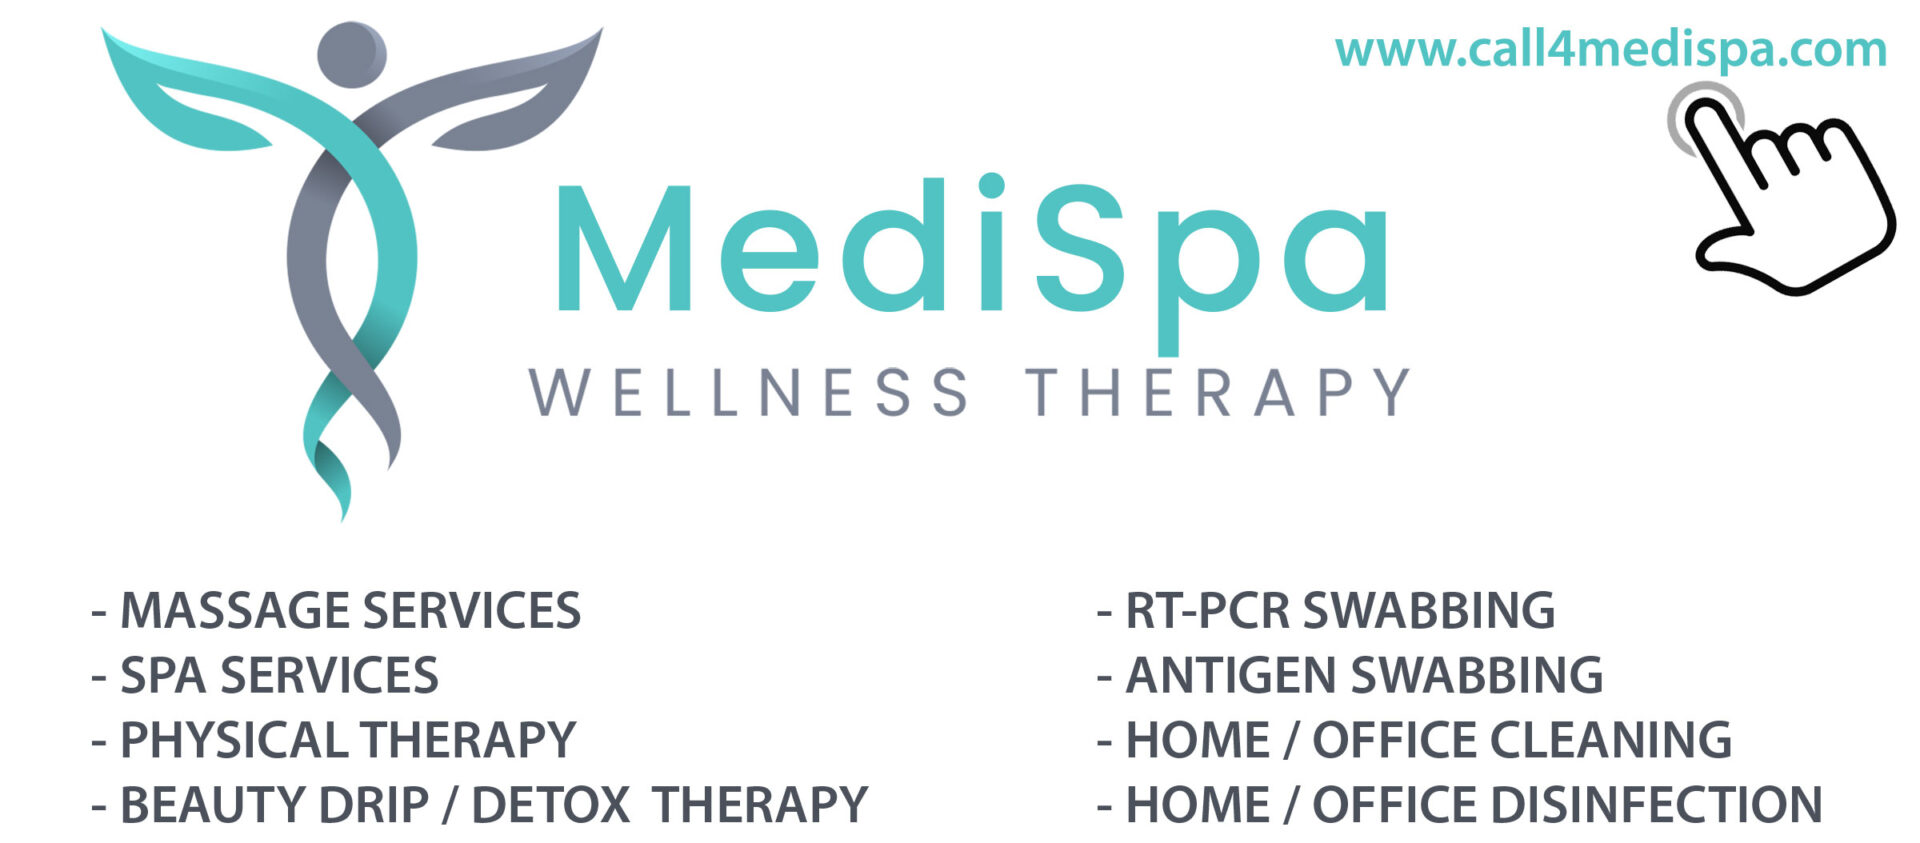 We are now closed. For your home service massage, spa, health and wellness needs; may we refer you to MEDISPA WELLNESS THERAPY.